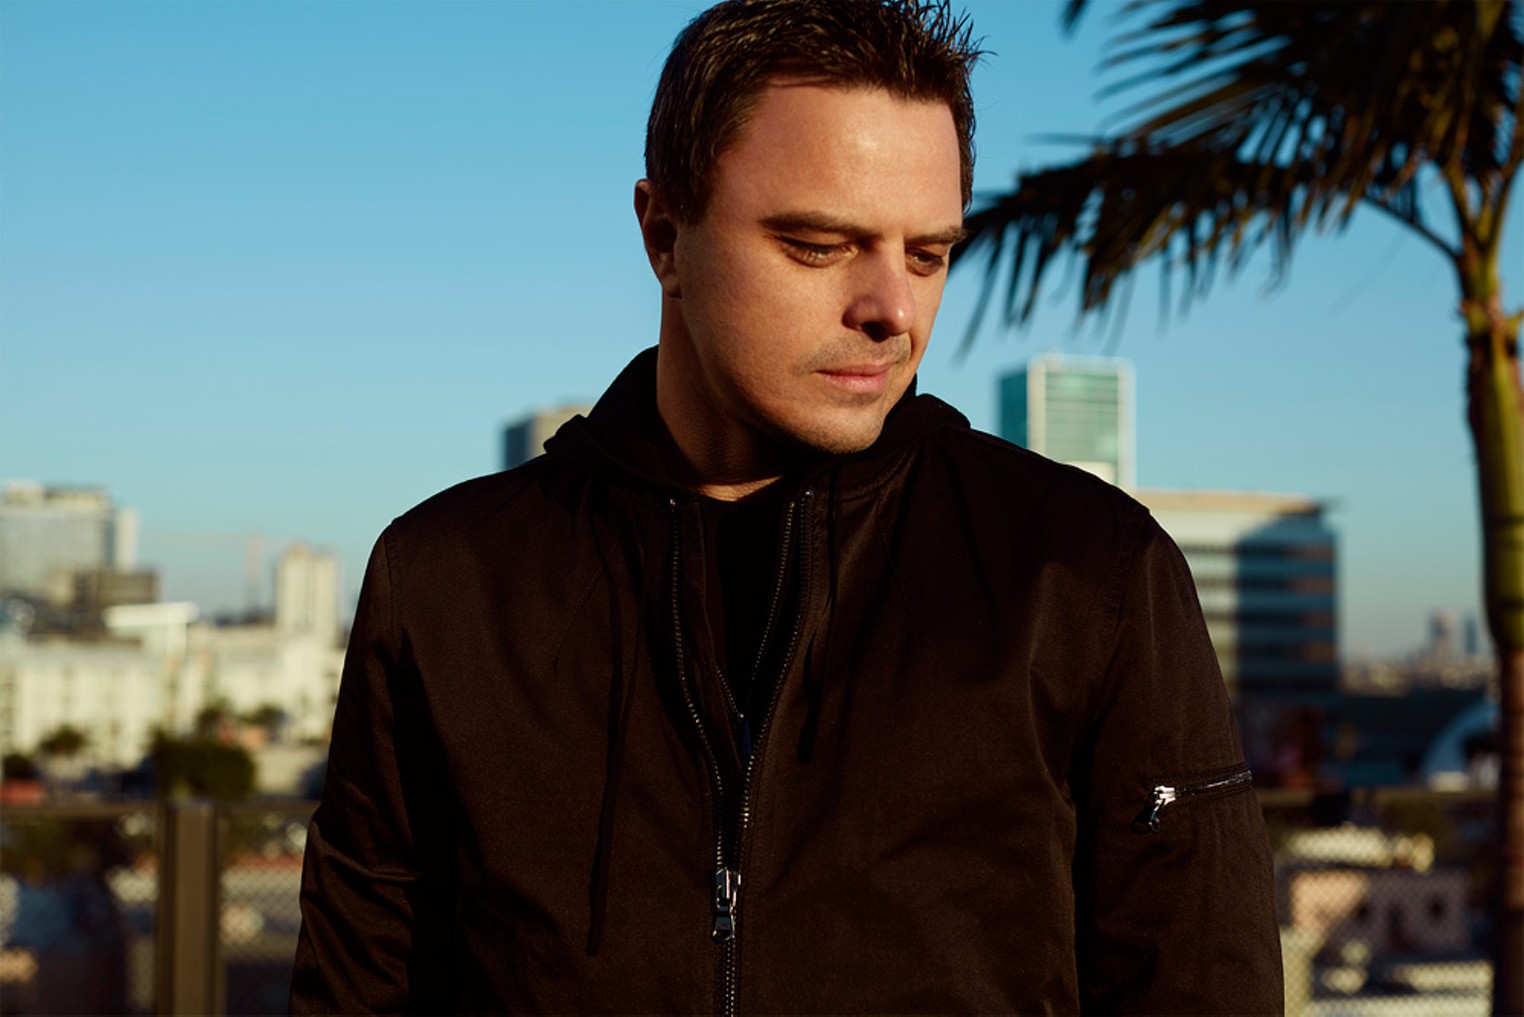 hoppe lanthan Karu Interview With Markus Schulz: Trance DJ Talks About His New Album, "We Are  the Light" | Miami New Times